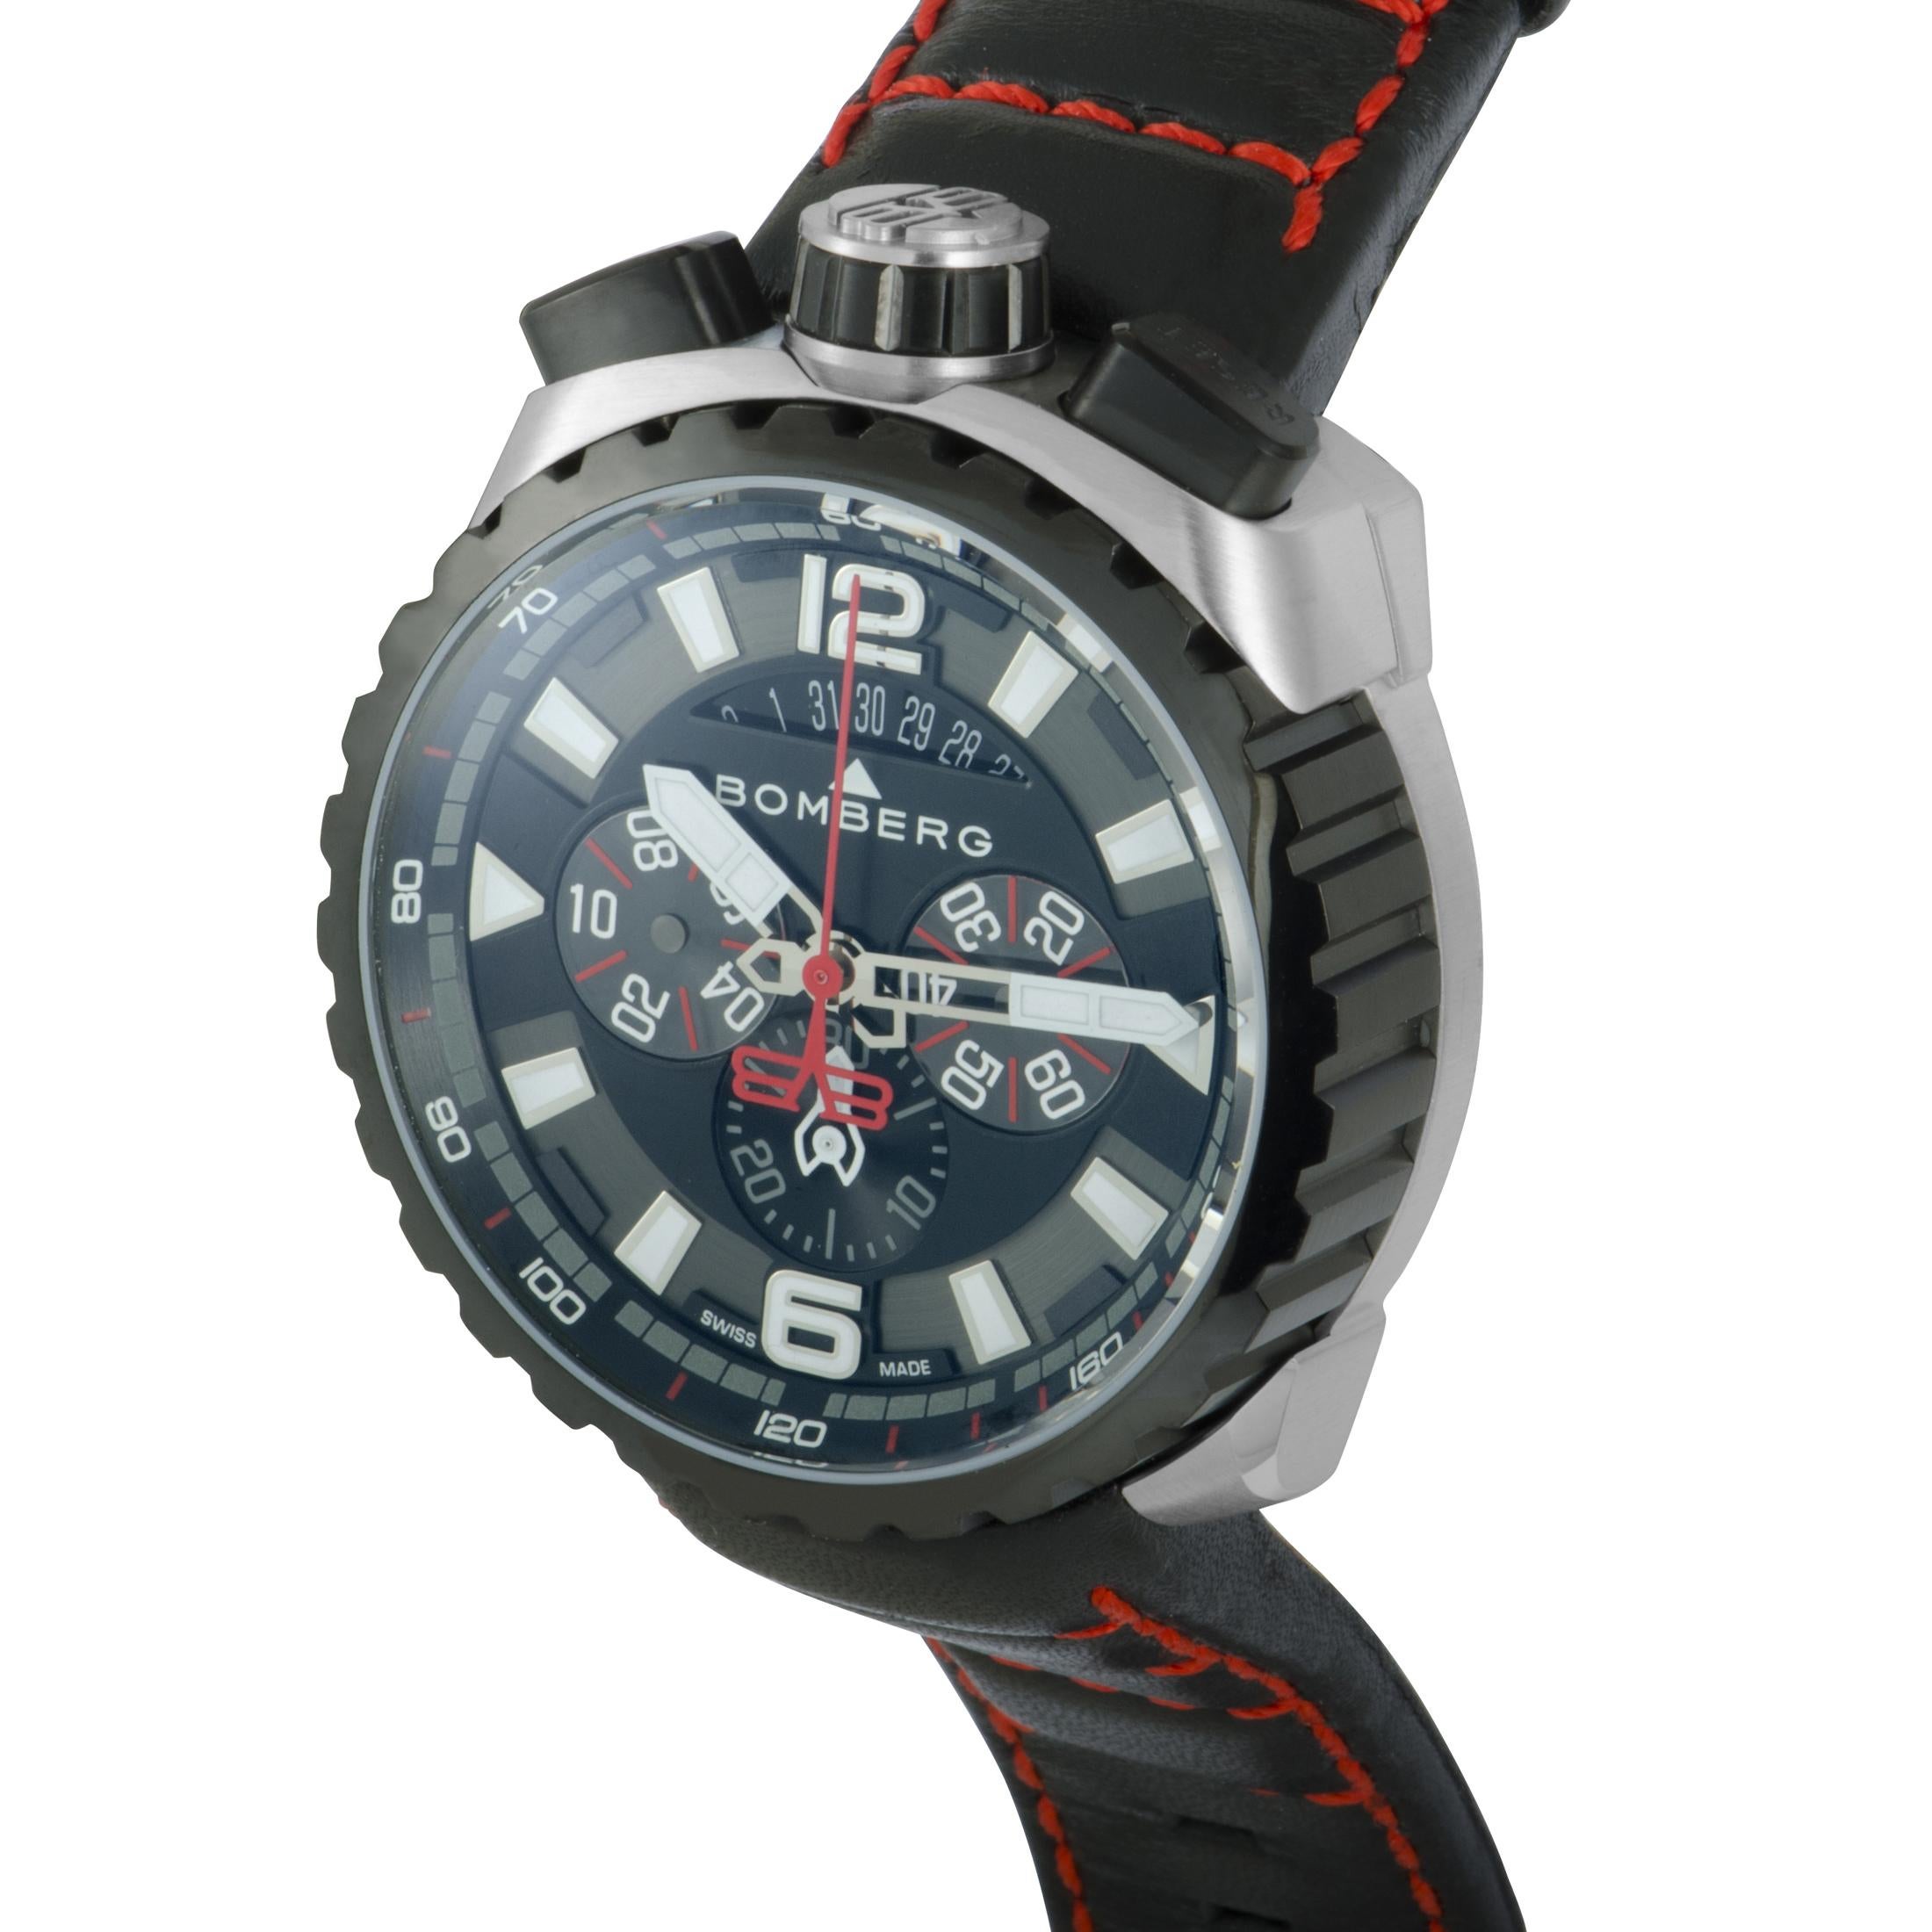 This is the Bomberg Bolt-68, reference number BS45CHSP.050-4.3.

It is presented with a 45 mm stainless steel case that is partially coated in black PVD. The case is mounted onto a black leather strap fitted with a tang buckle, but can also be worn